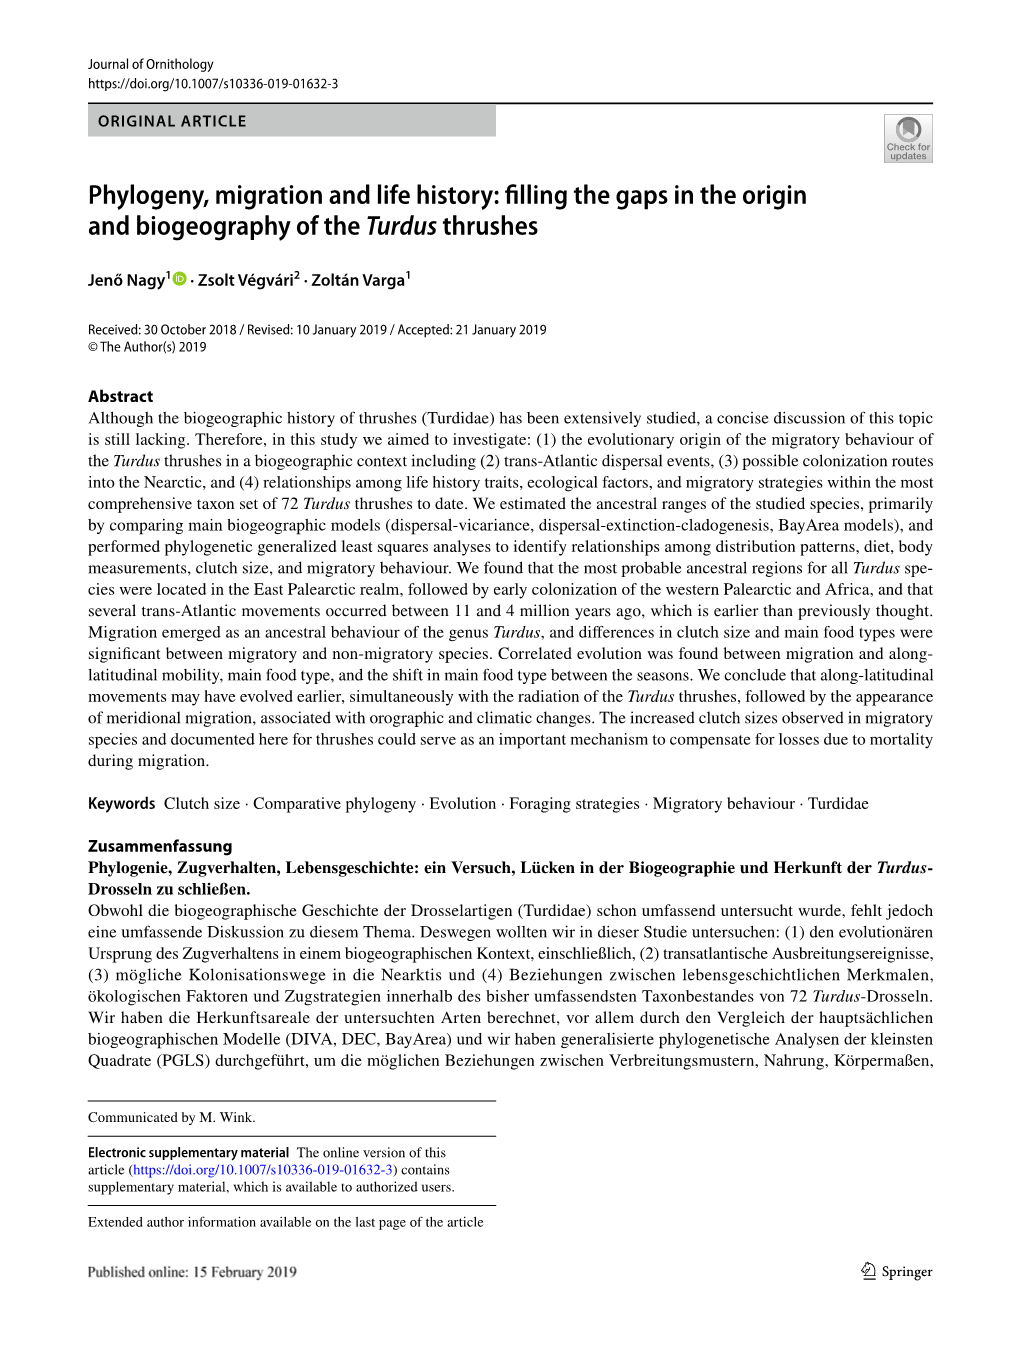 Filling the Gaps in the Origin and Biogeography of the Turdus Thrushes